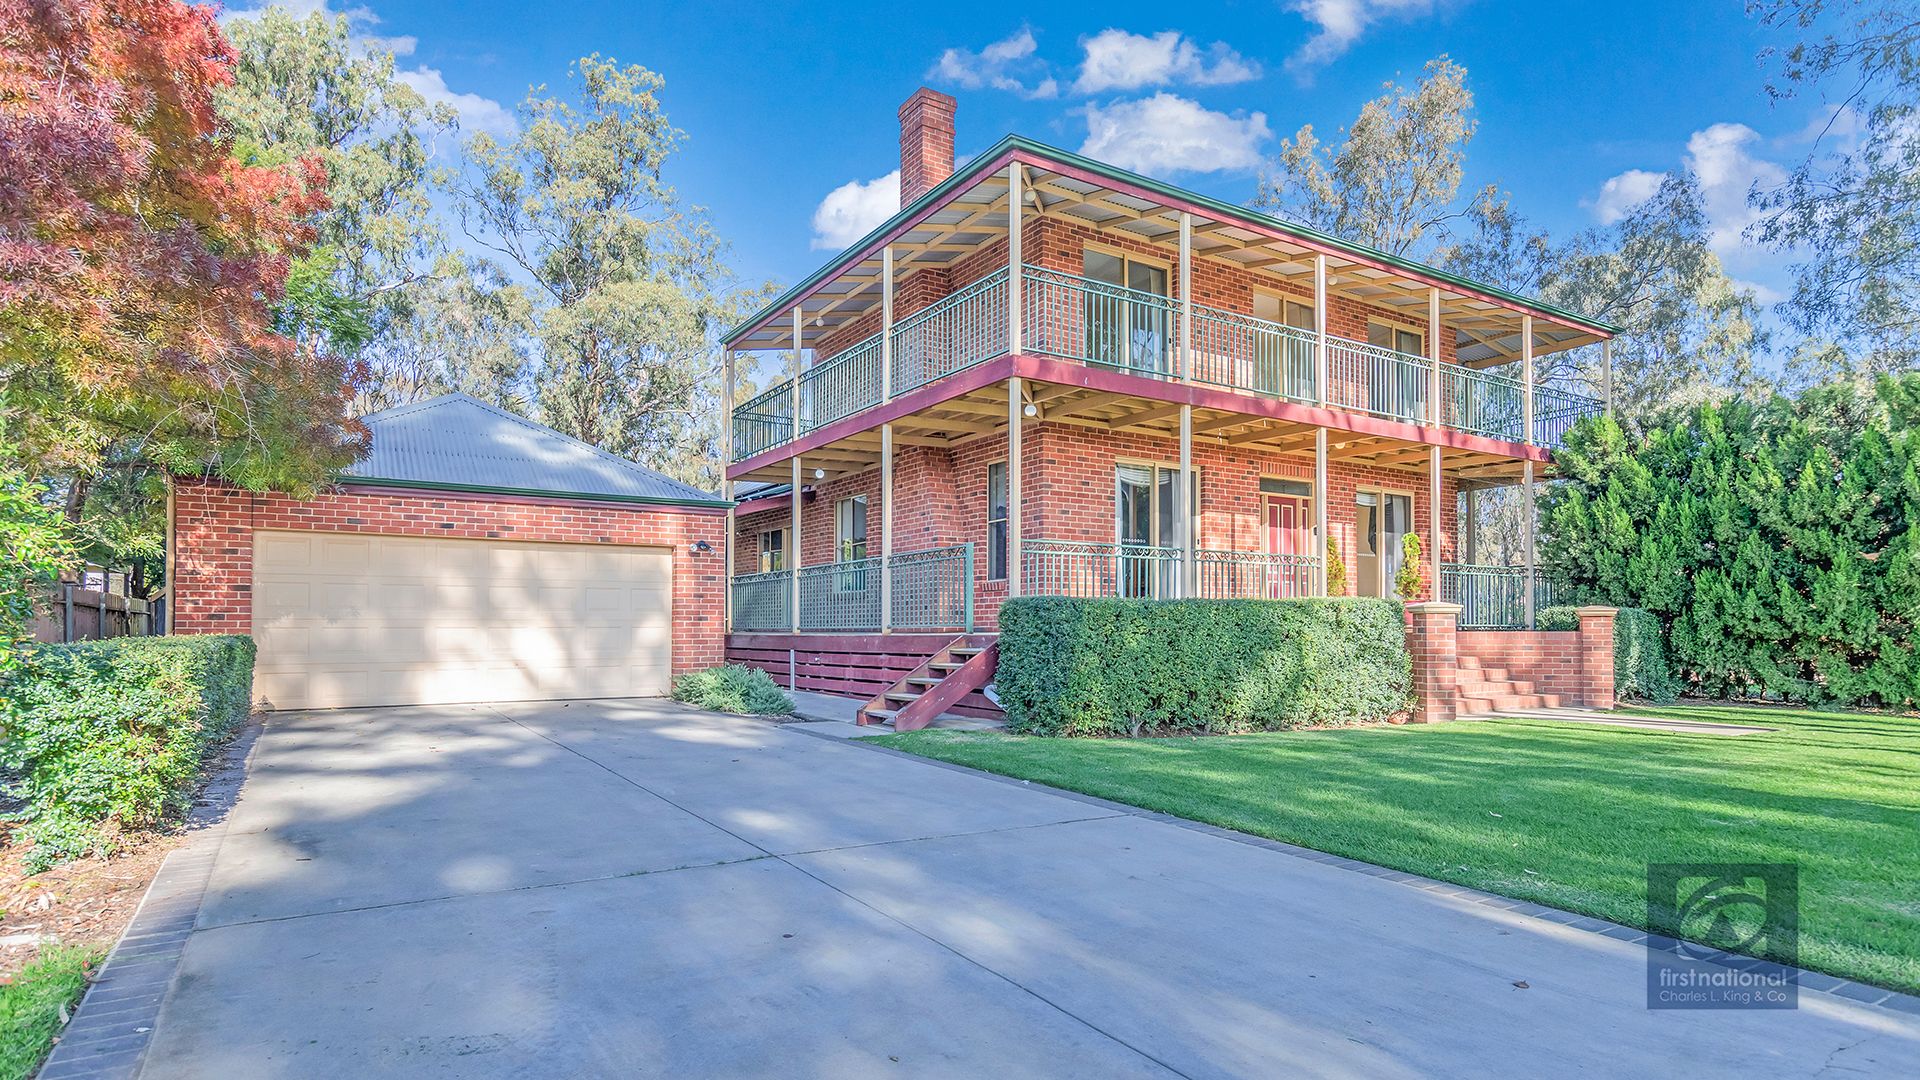 21-23 Connelly Street, Echuca VIC 3564, Image 0